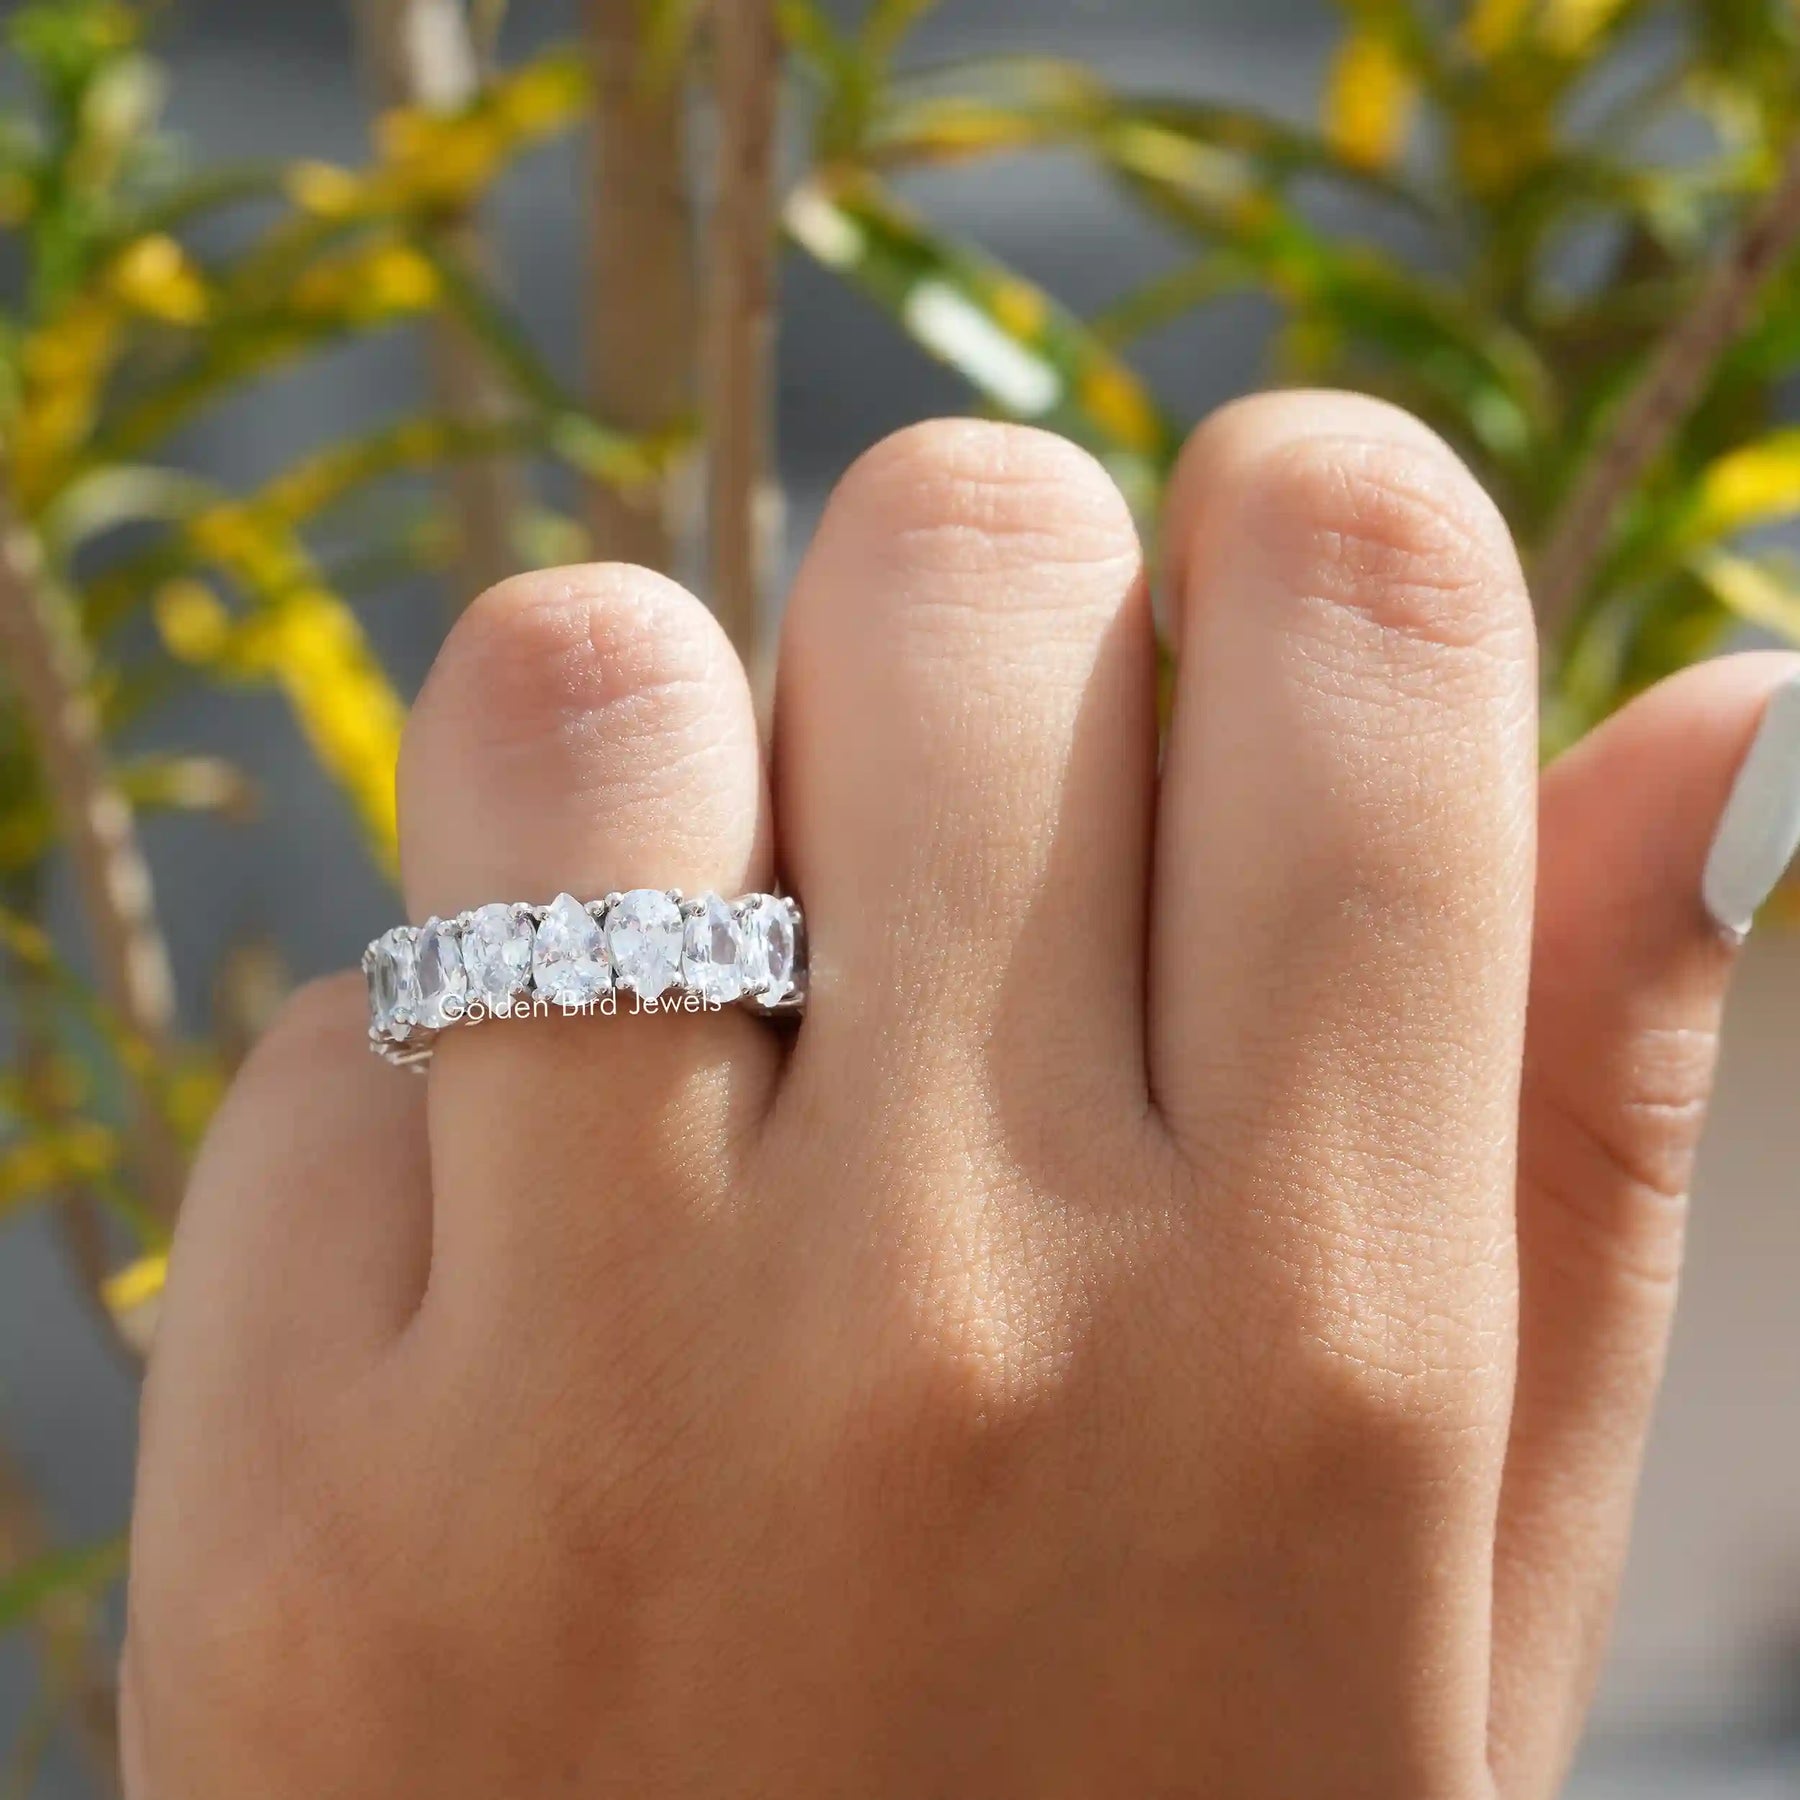 [This eternity band made of white gold and prong setting]-[Golden Bird Jewels]